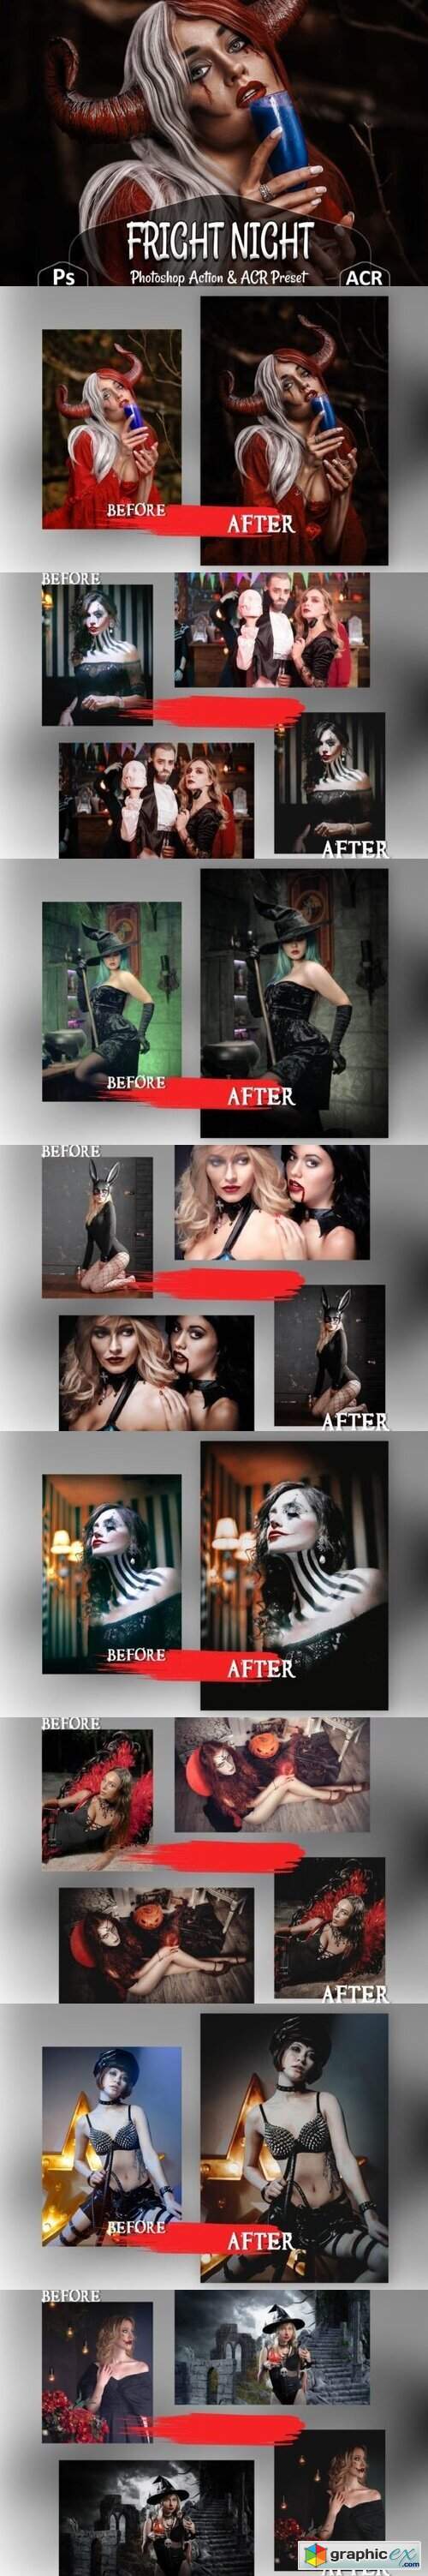  10 Fright Night Photoshop Actions 